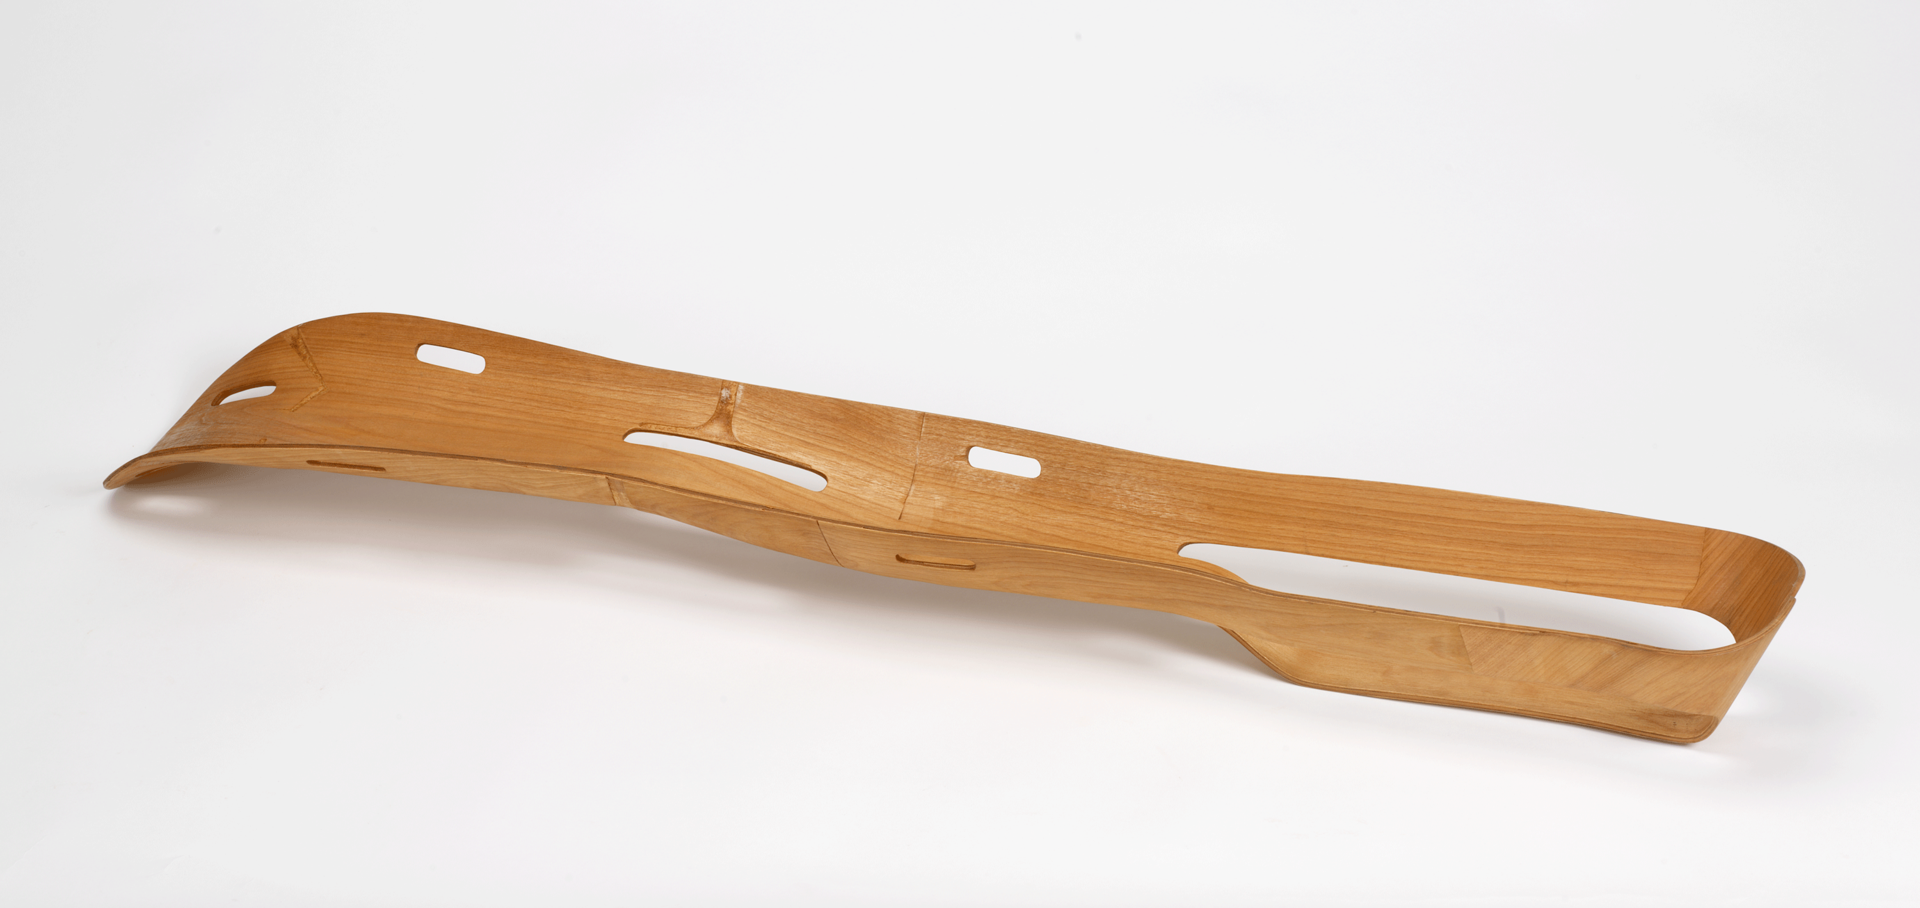 Photo of a wooden support made for leg injuries.